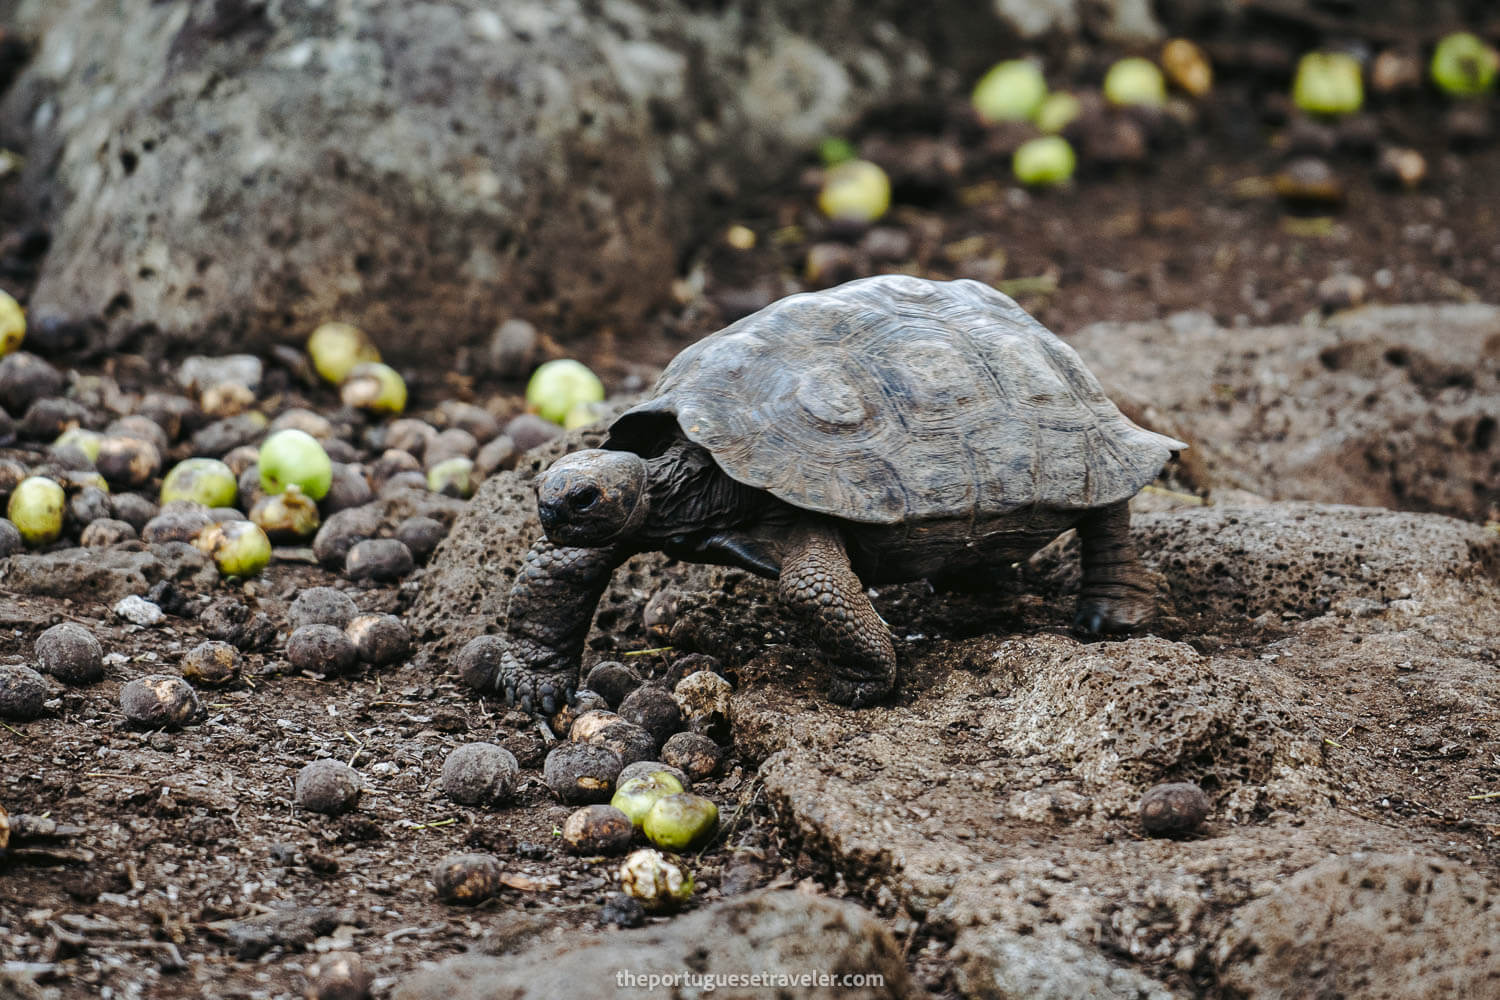 A baby Galapagos tortoise